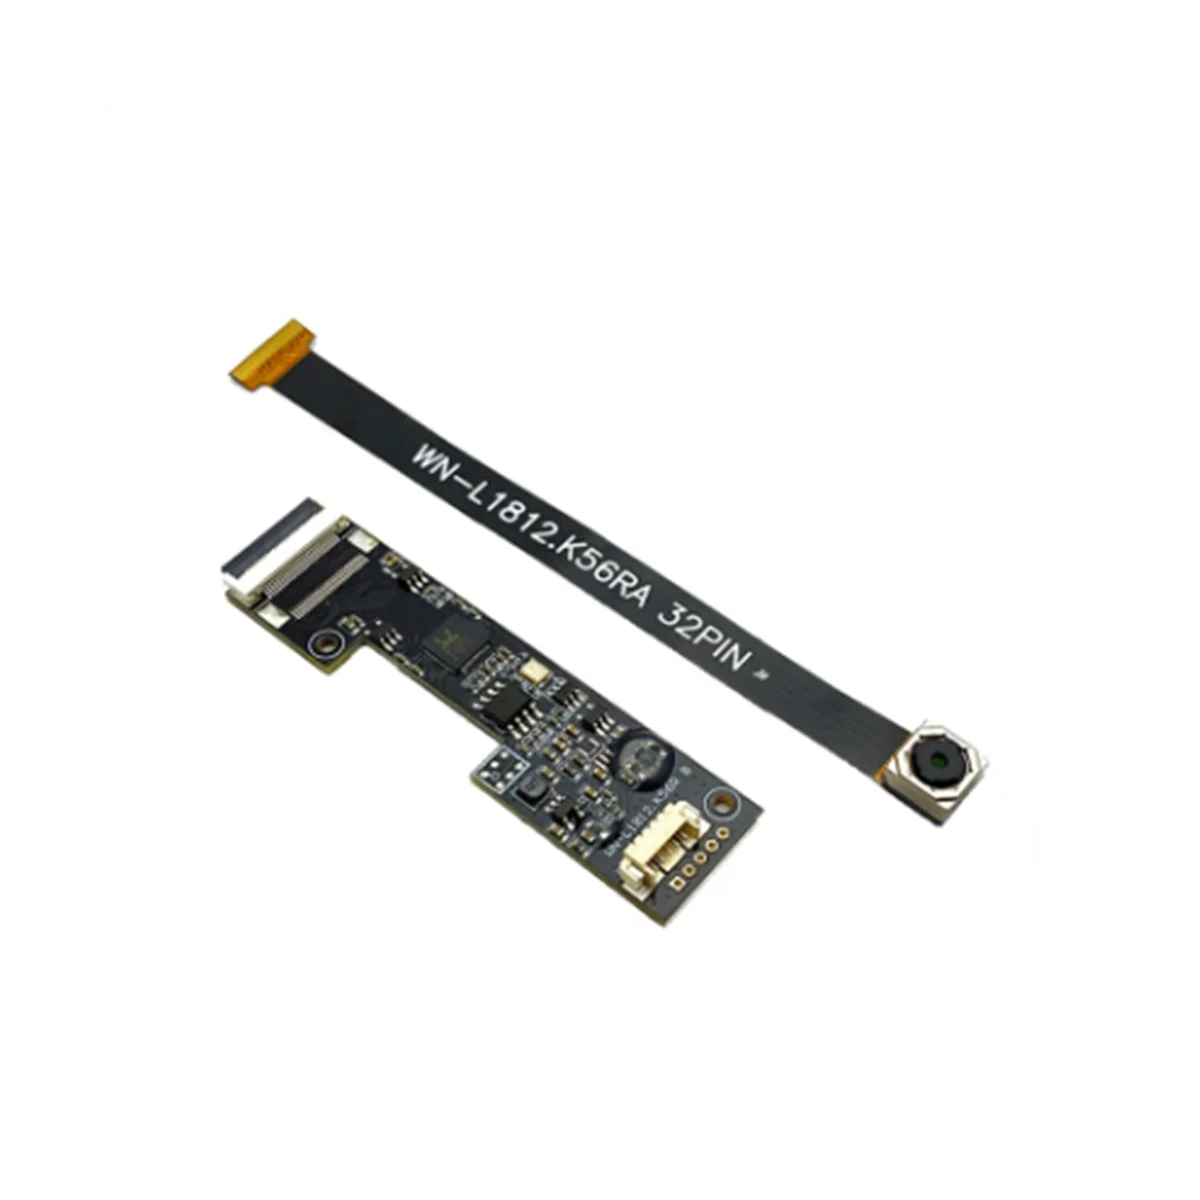 

4K 3264 x 2448 8MP HD CMOS IMX179 75° High Speed USB2.0 Camera Module 15FPS for Product Vision